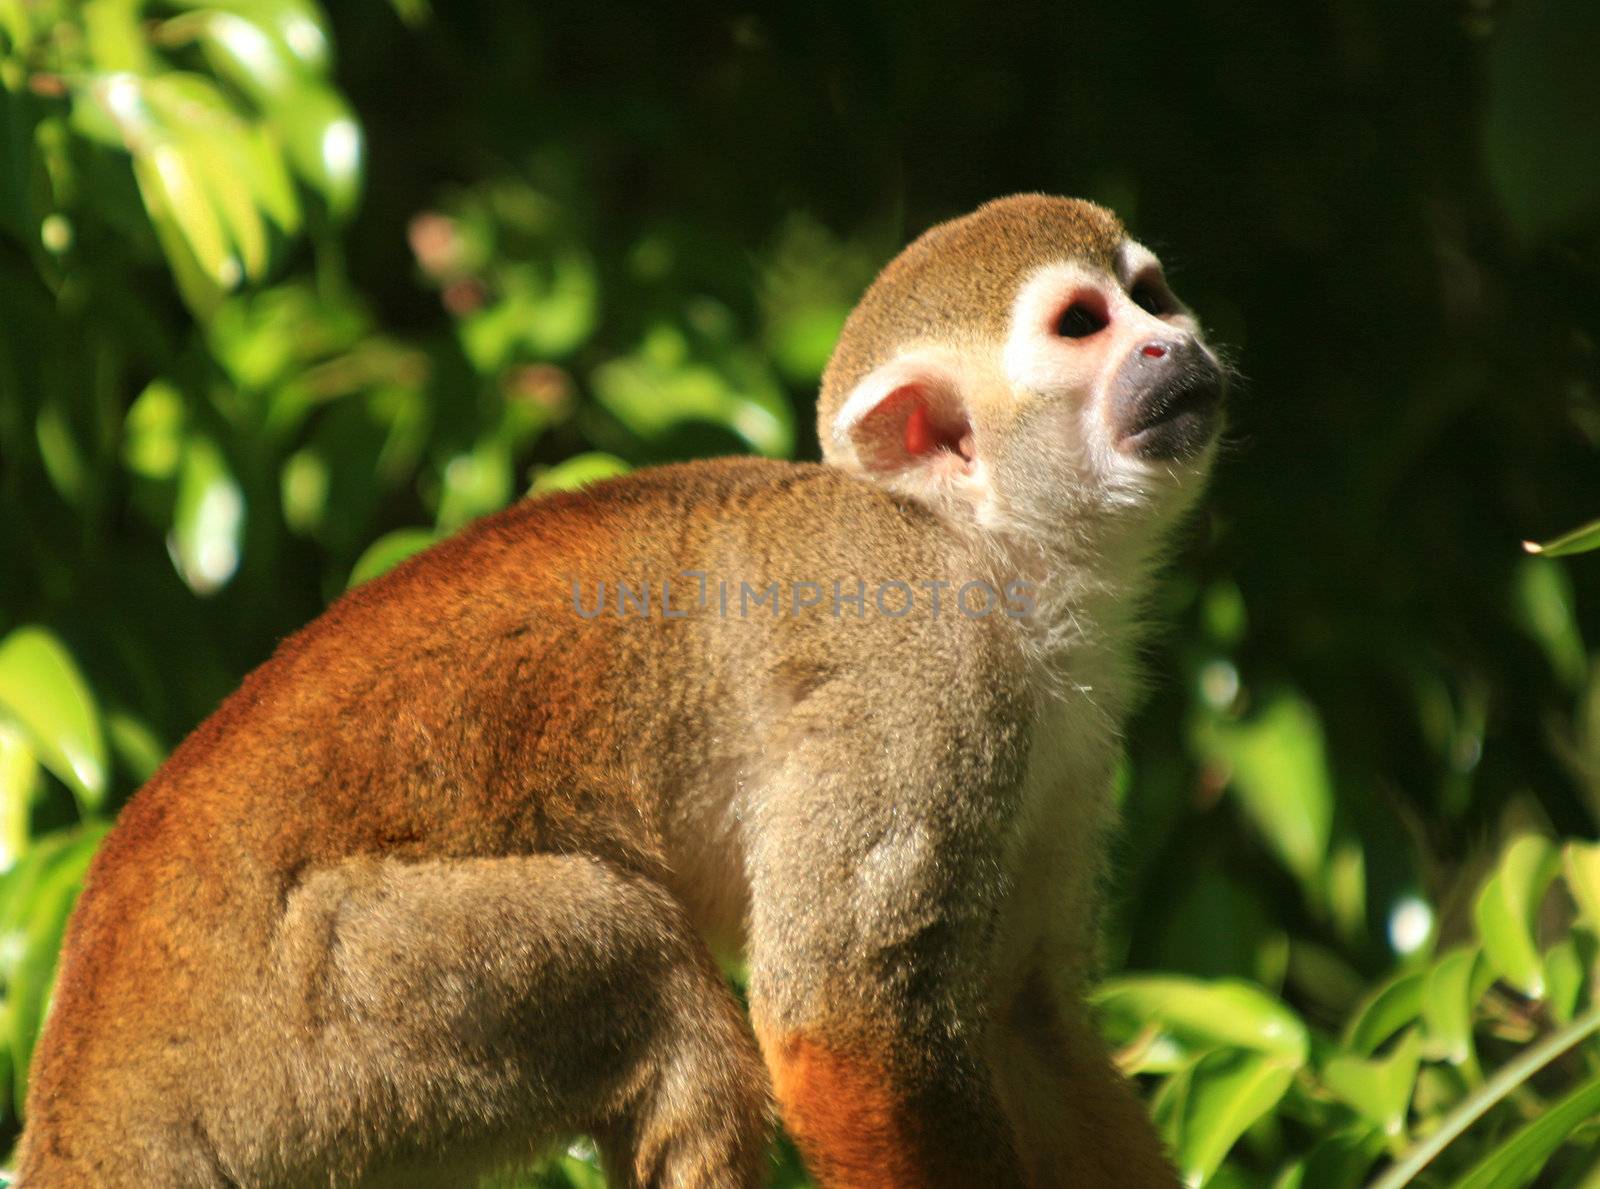 The common Squirrel Monkey (Saimiri sciureus) is about the size of a squirrel and does not have a prehensile tail.  The tail is used for balance rather than grasping.